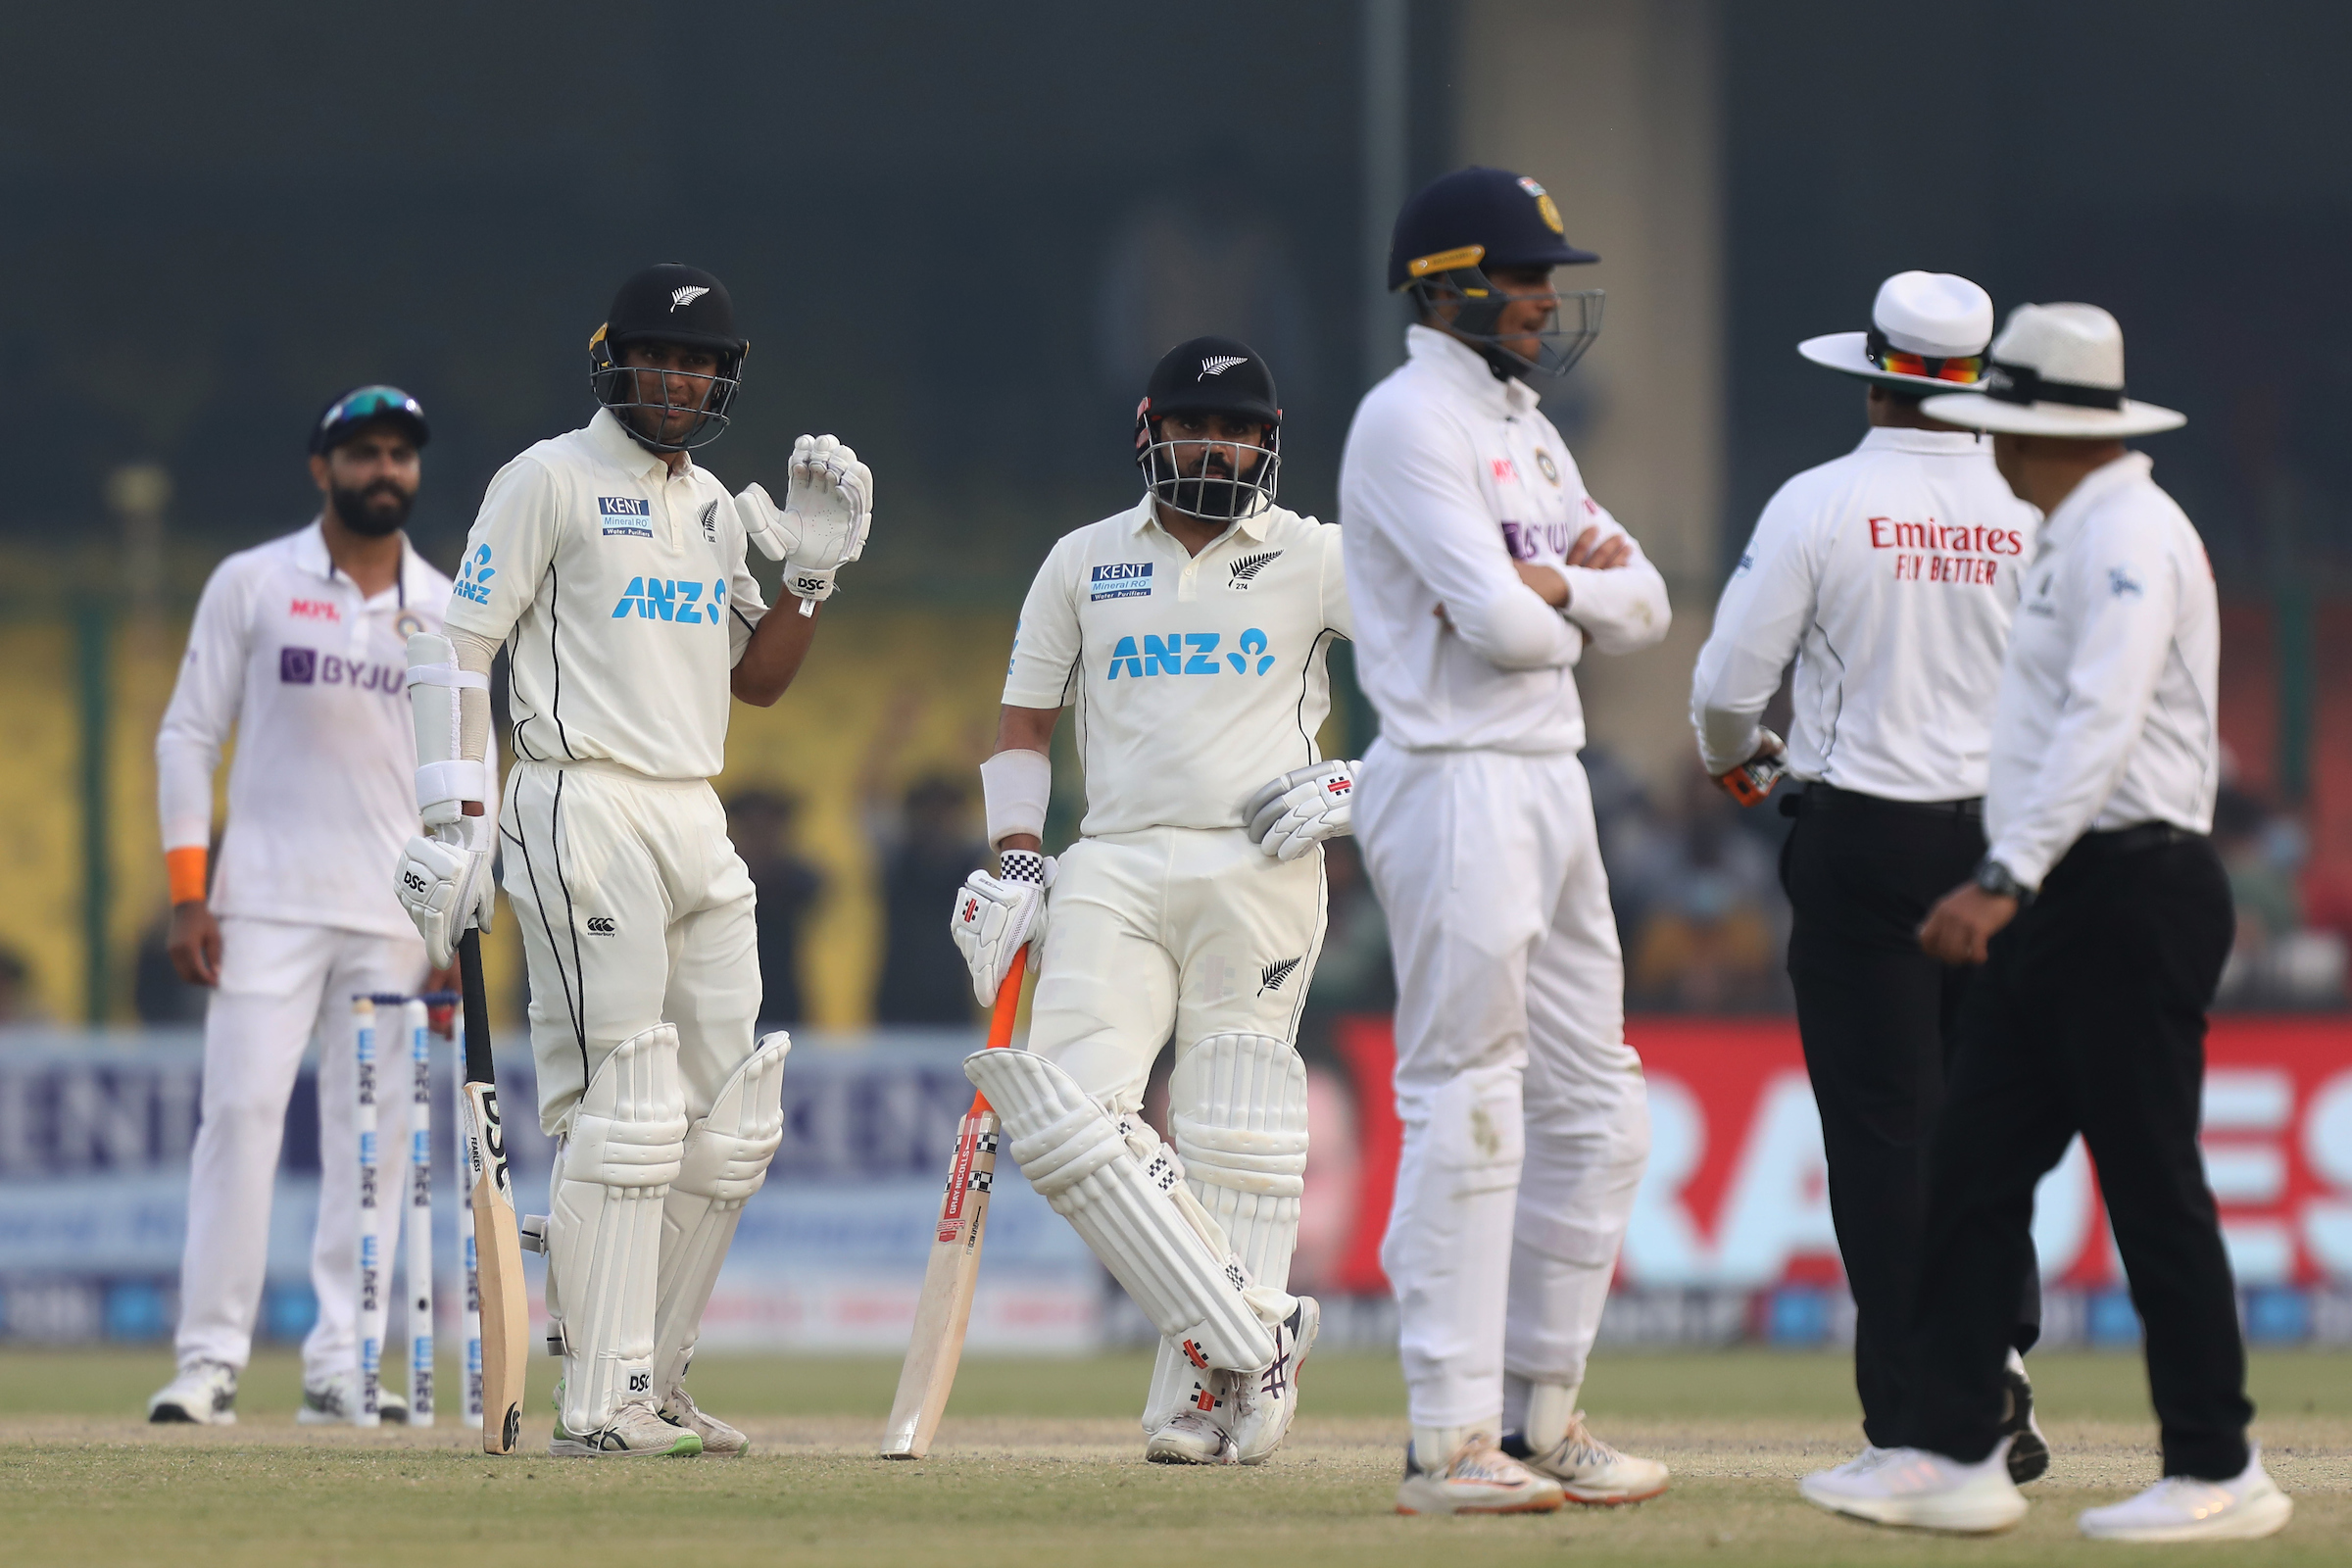 Rachin Ravindra and Ajaz Patel save the match for New Zealand | BCCI